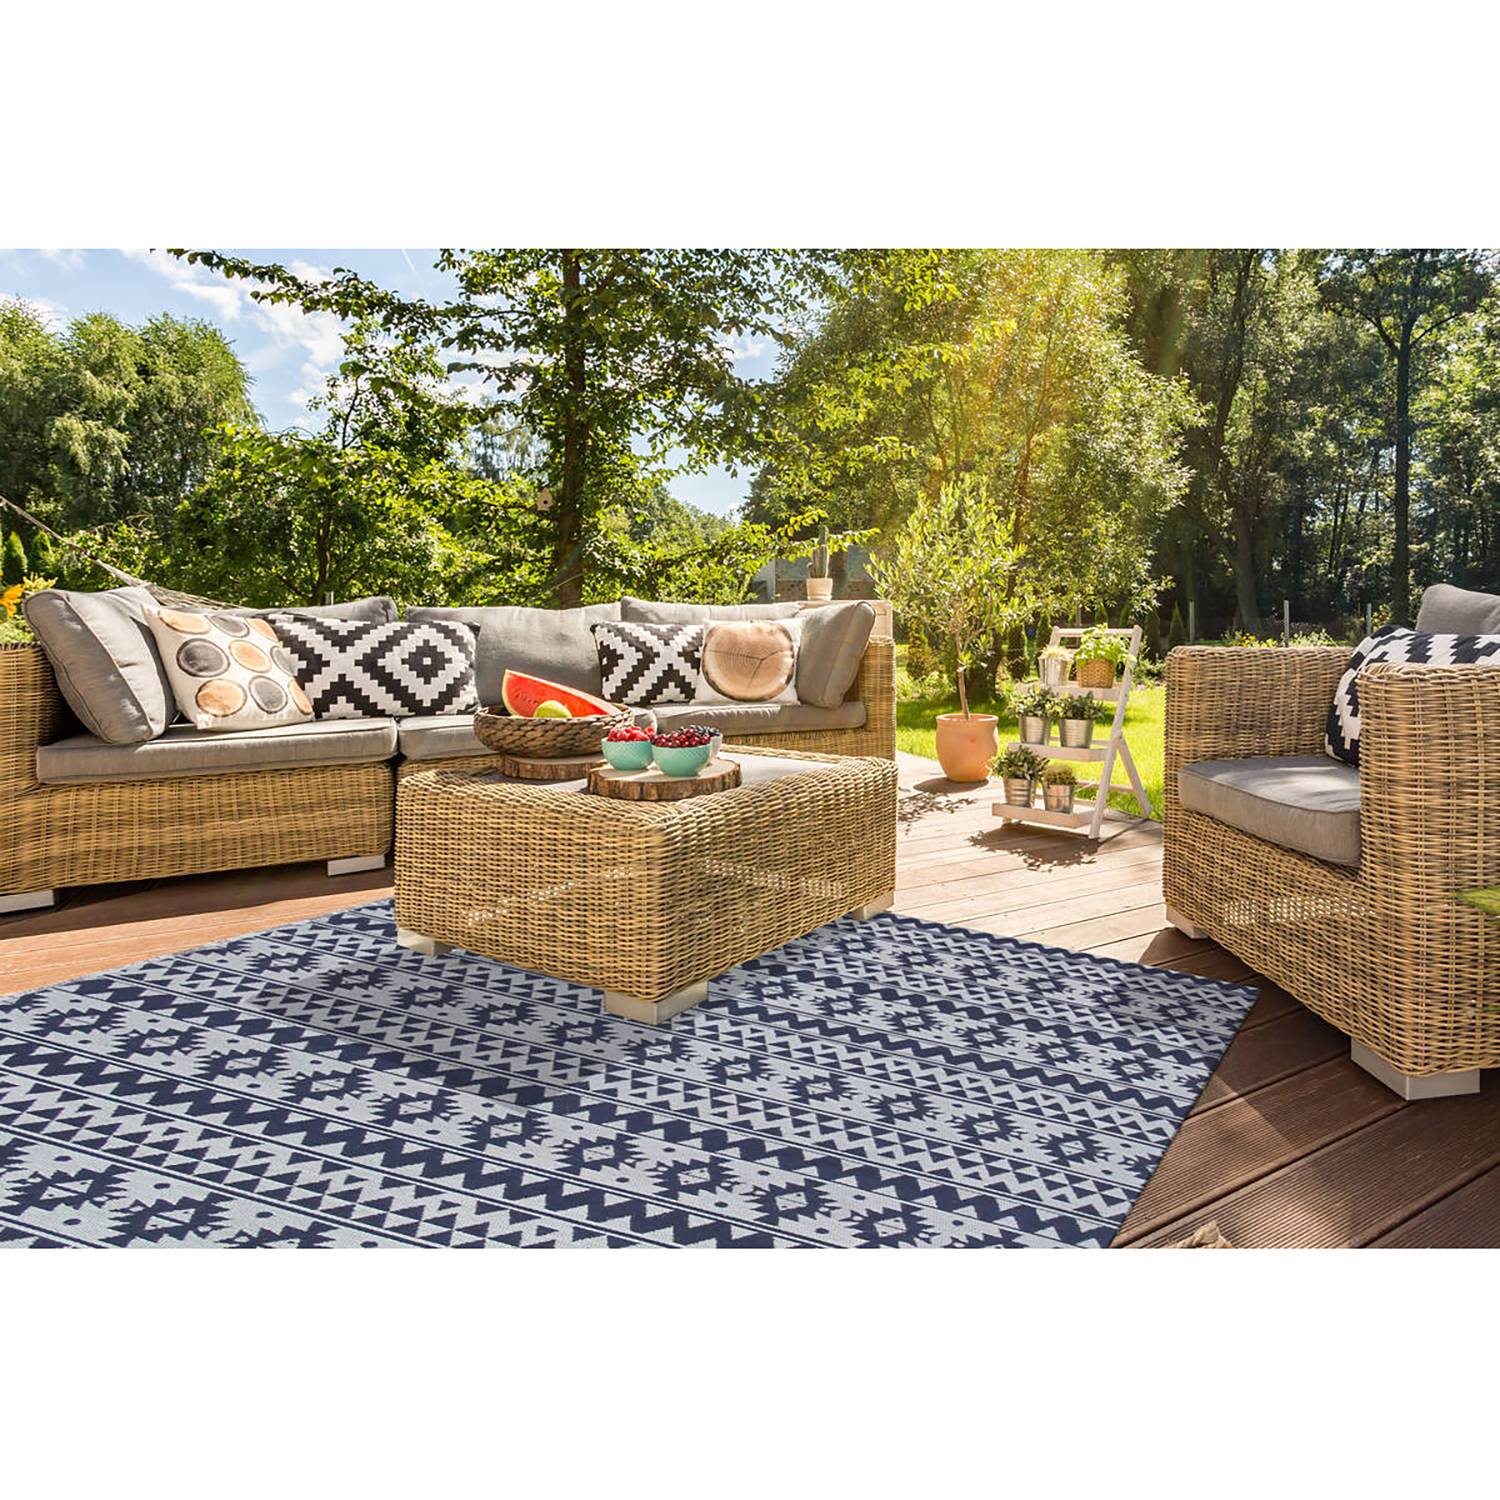 In-/Outdoorteppich Sunny 210 